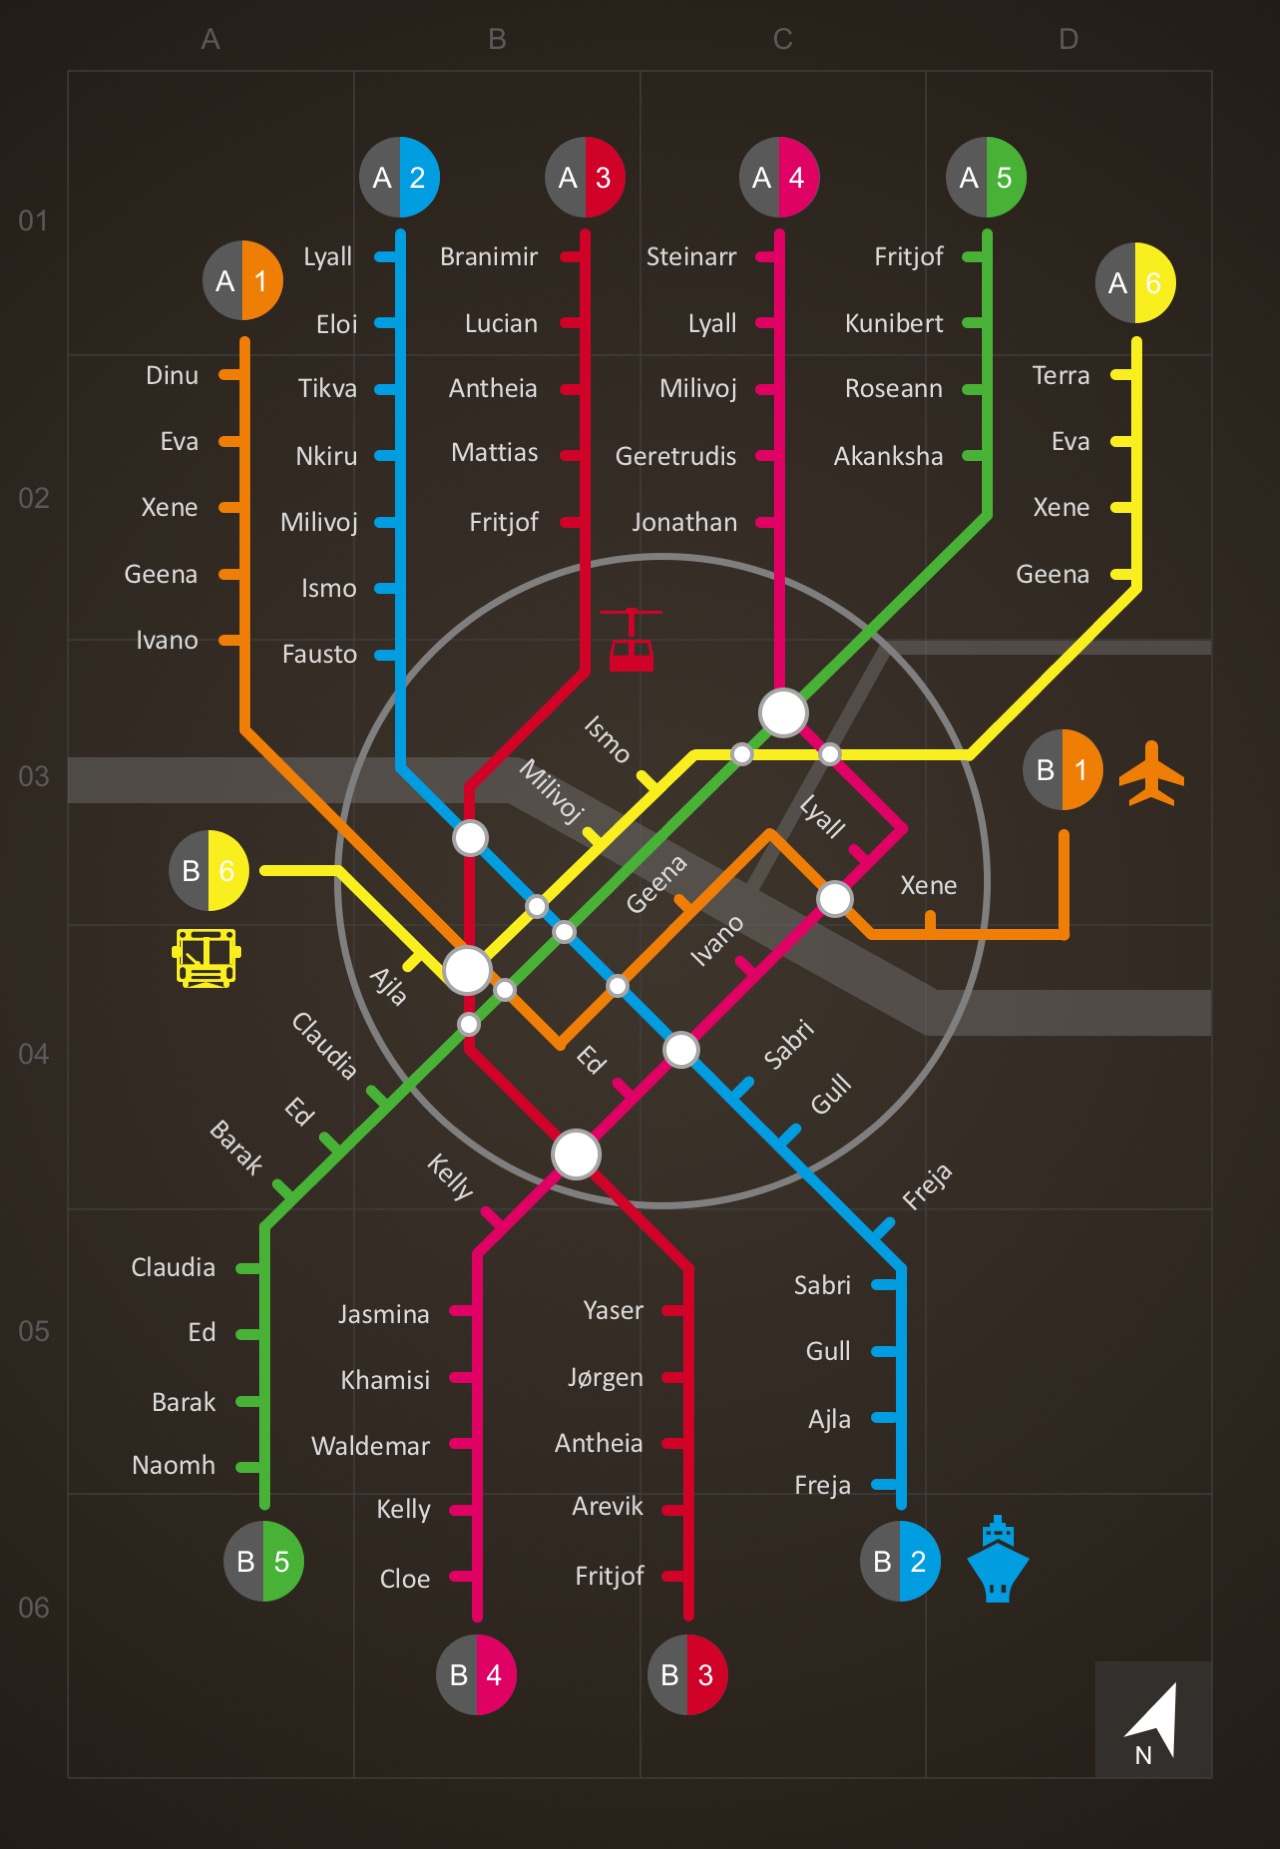 Subway Metro Map Cool Design Style PowerPoint